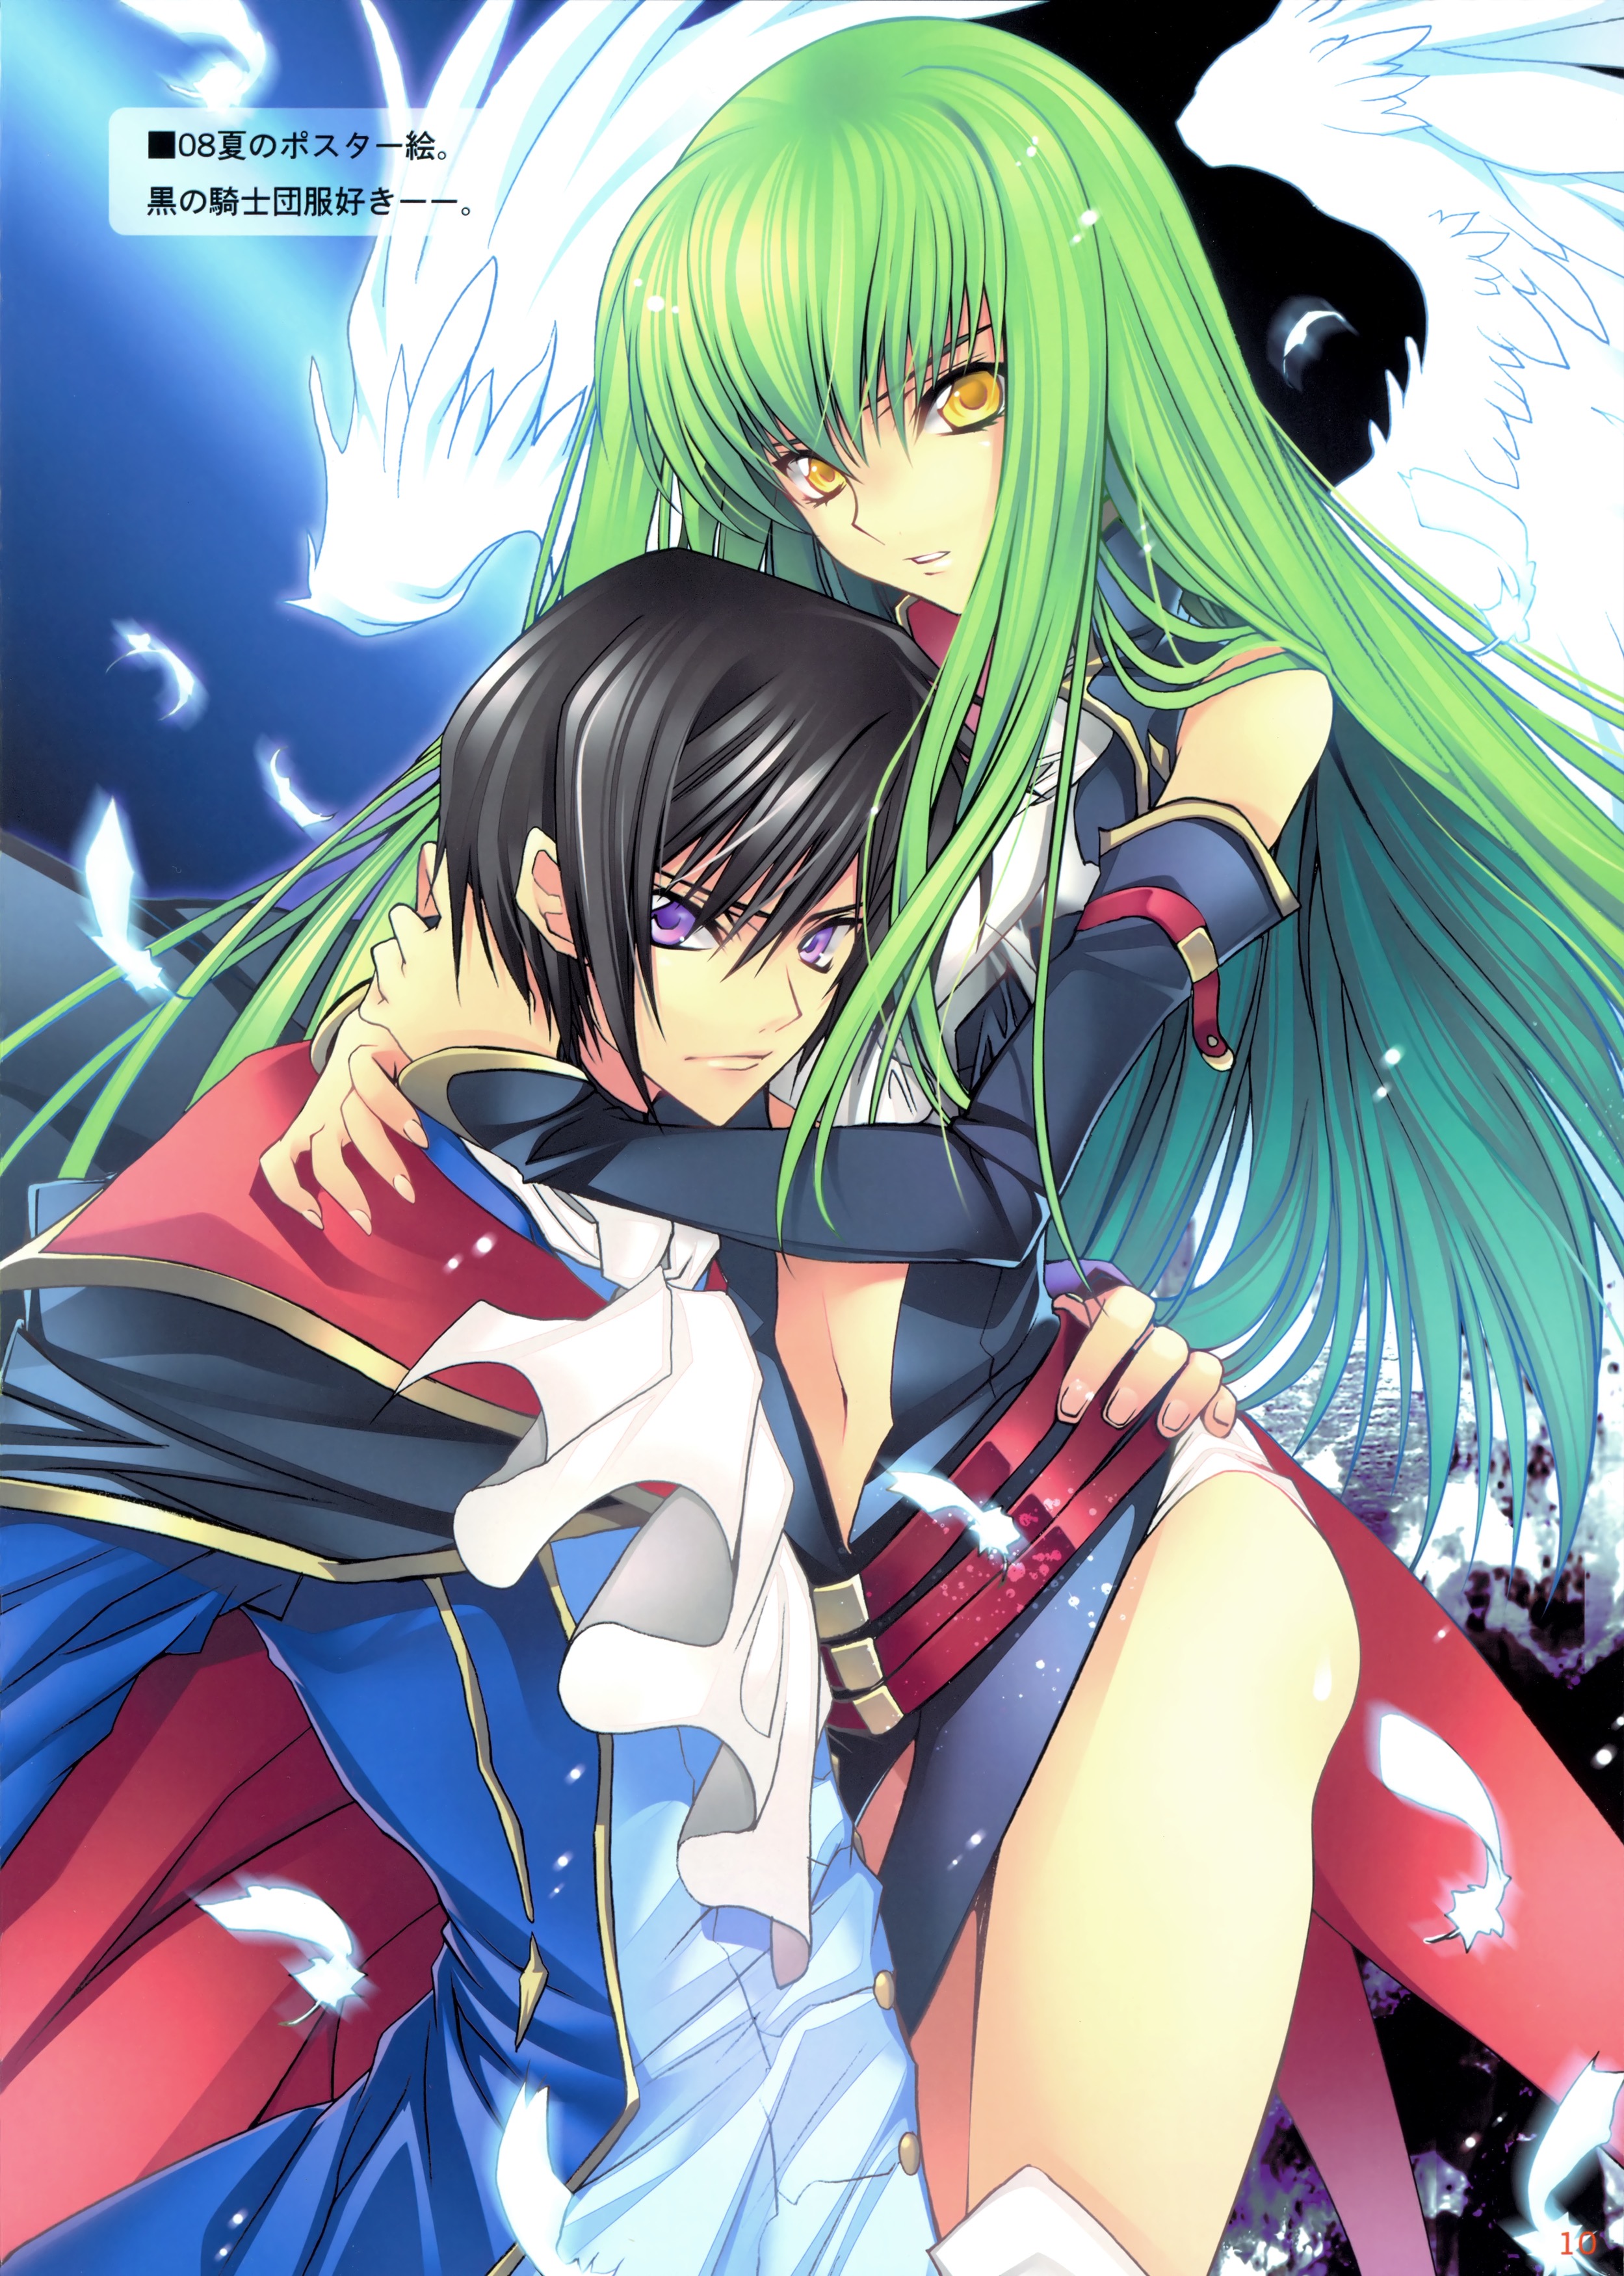 Code Geass c.c and Lelouch